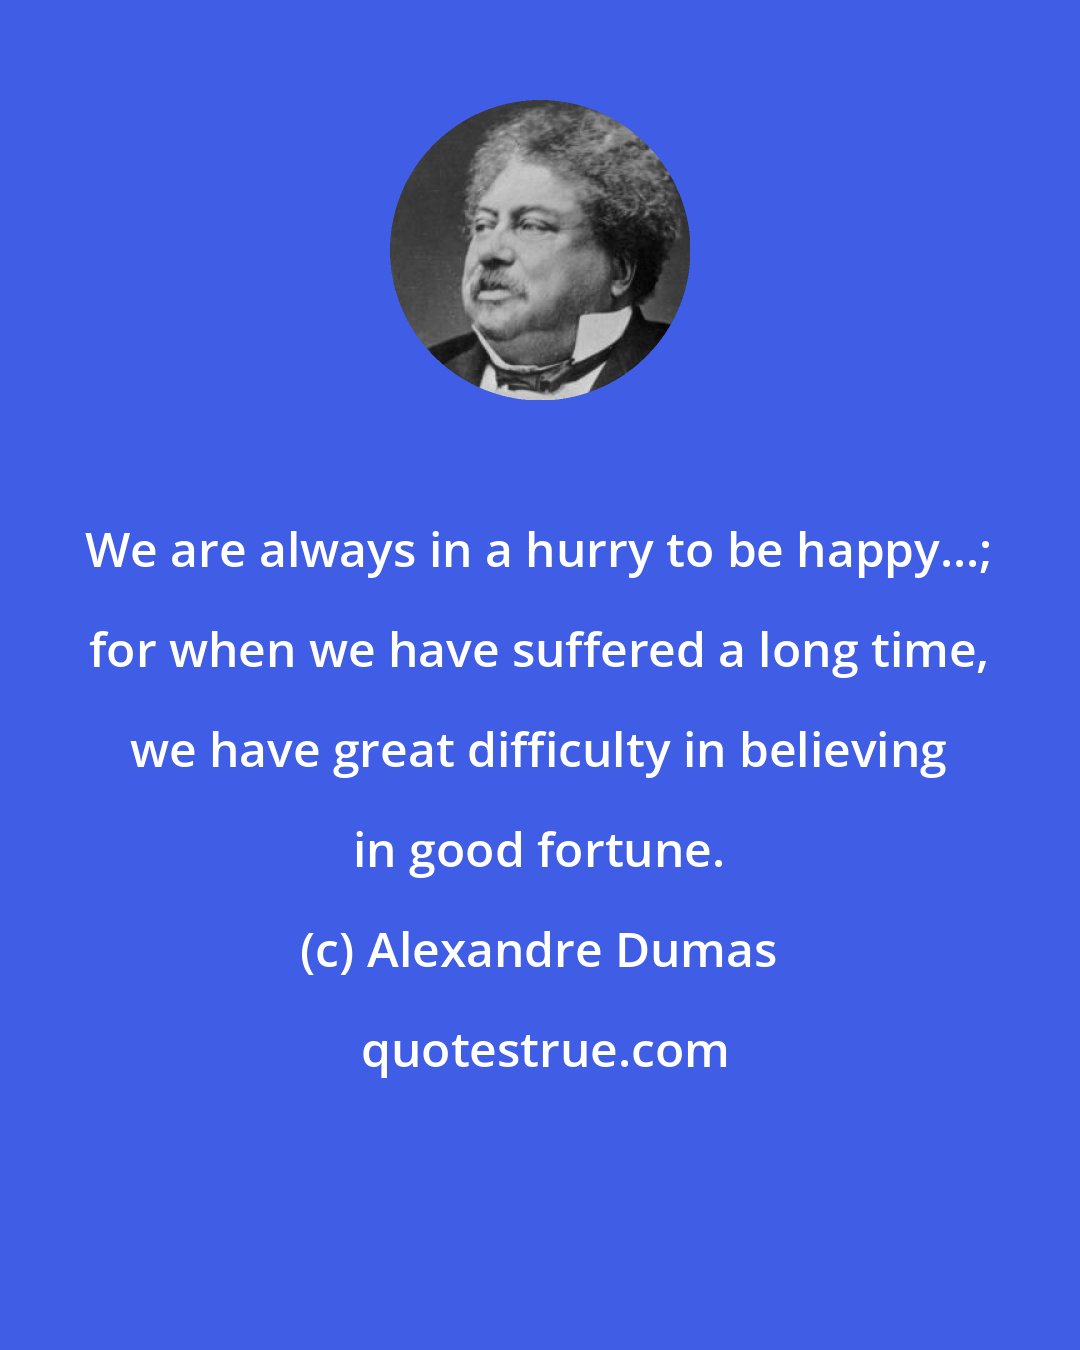 Alexandre Dumas: We are always in a hurry to be happy...; for when we have suffered a long time, we have great difficulty in believing in good fortune.